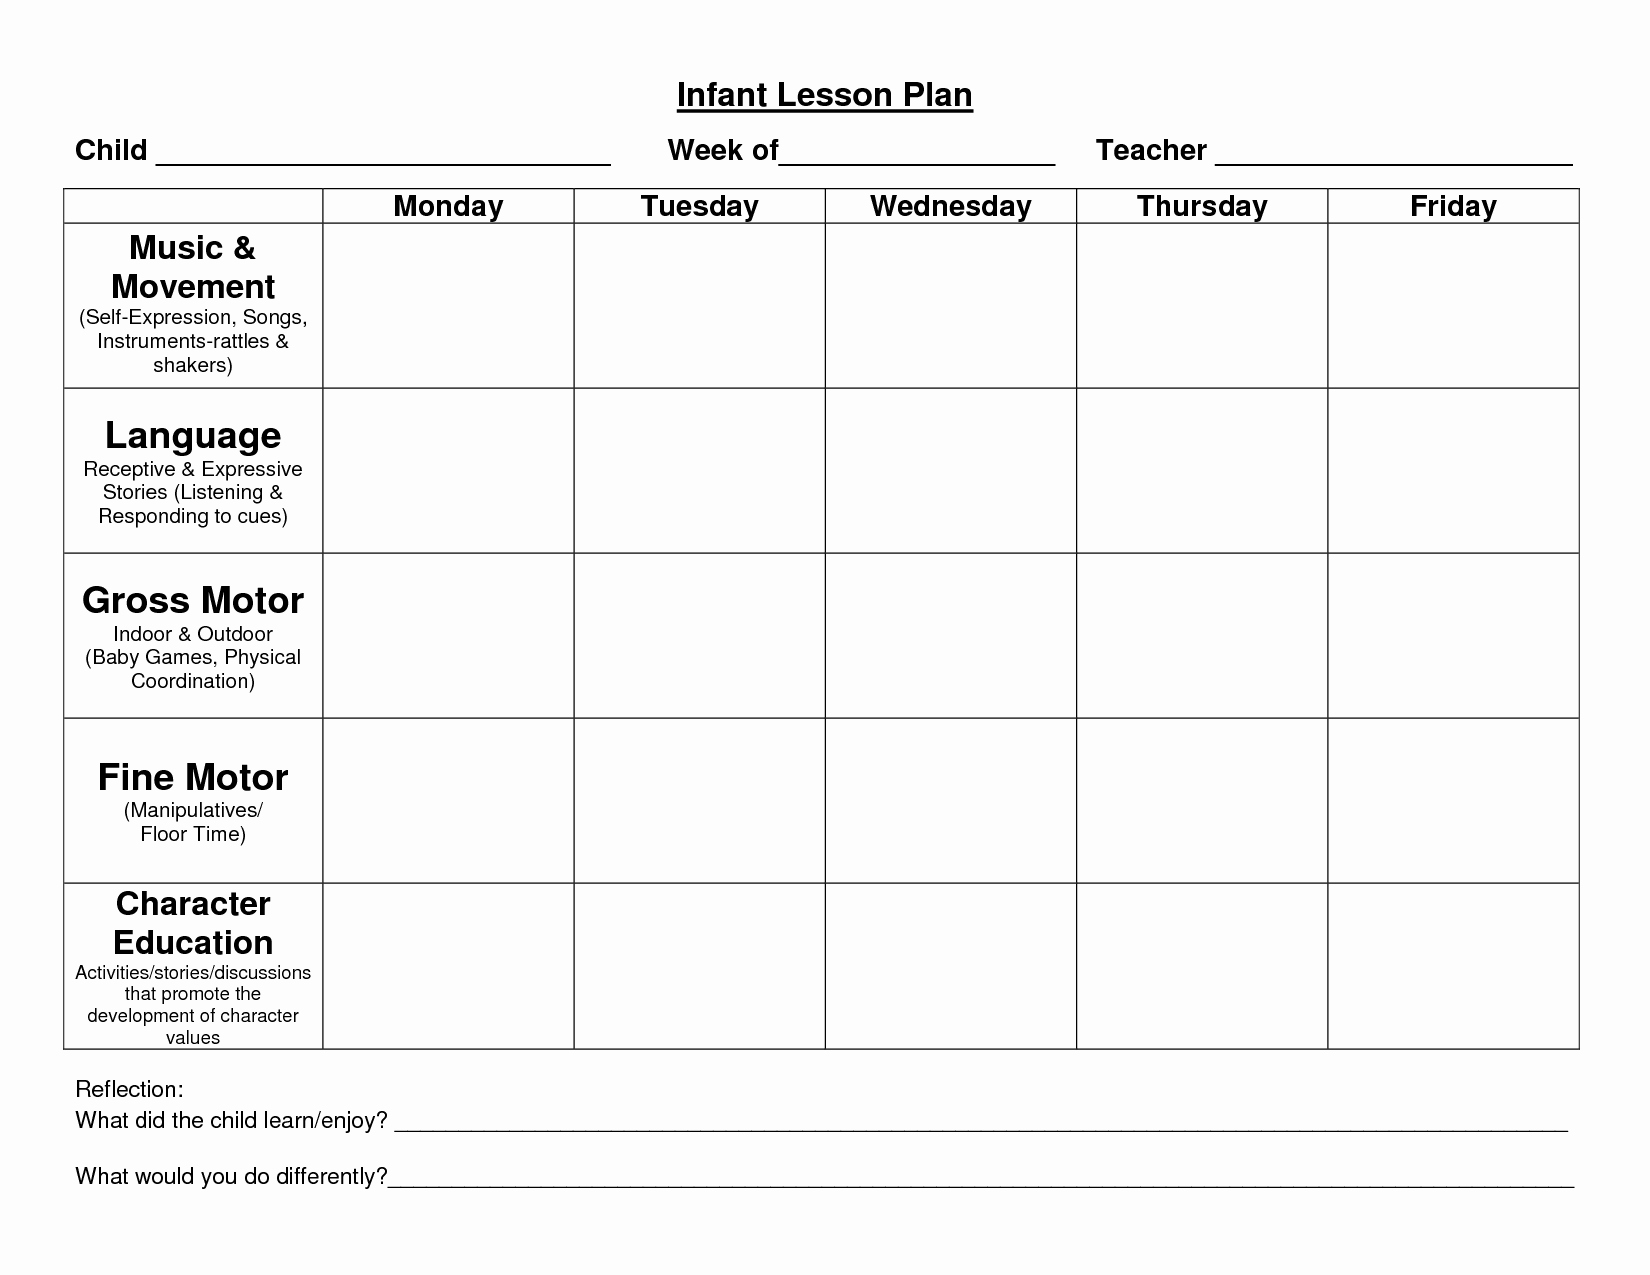 Sample Lesson Plans for toddlers New Infant Blank Lesson Plan Sheets